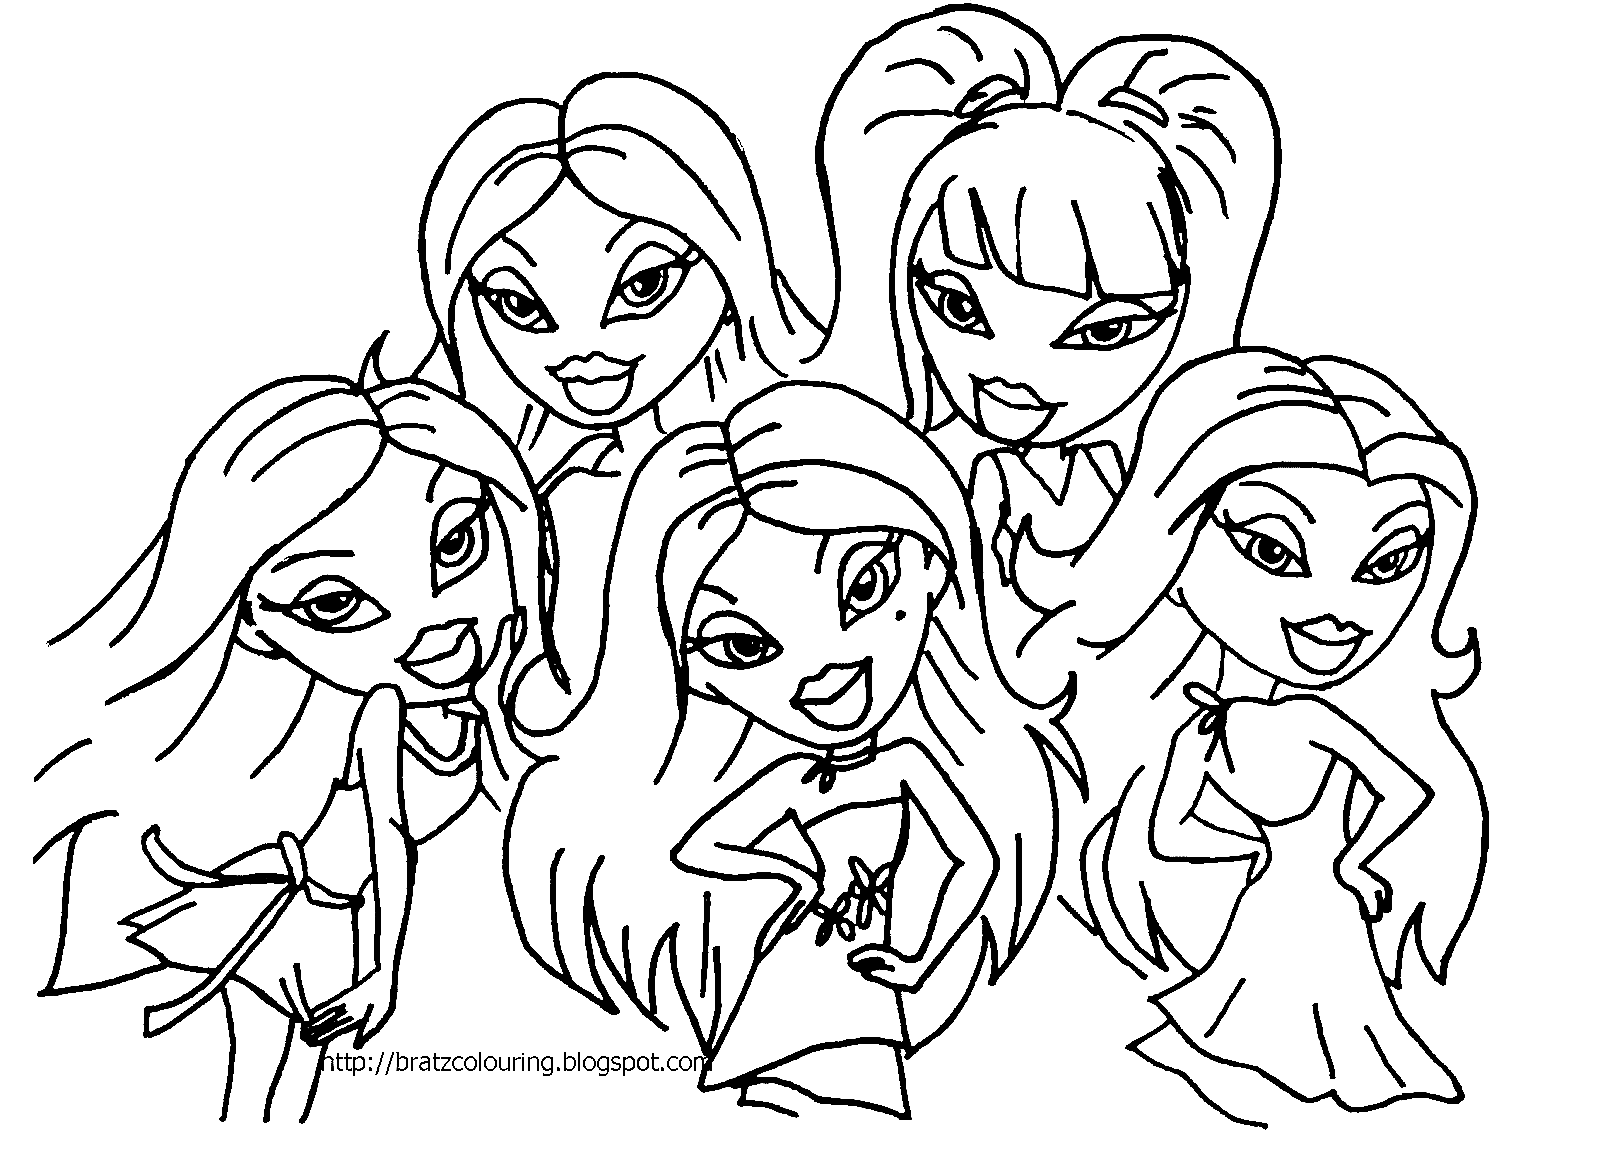 Fashionable & Fun Bratz Coloring Pages for Kids to Color